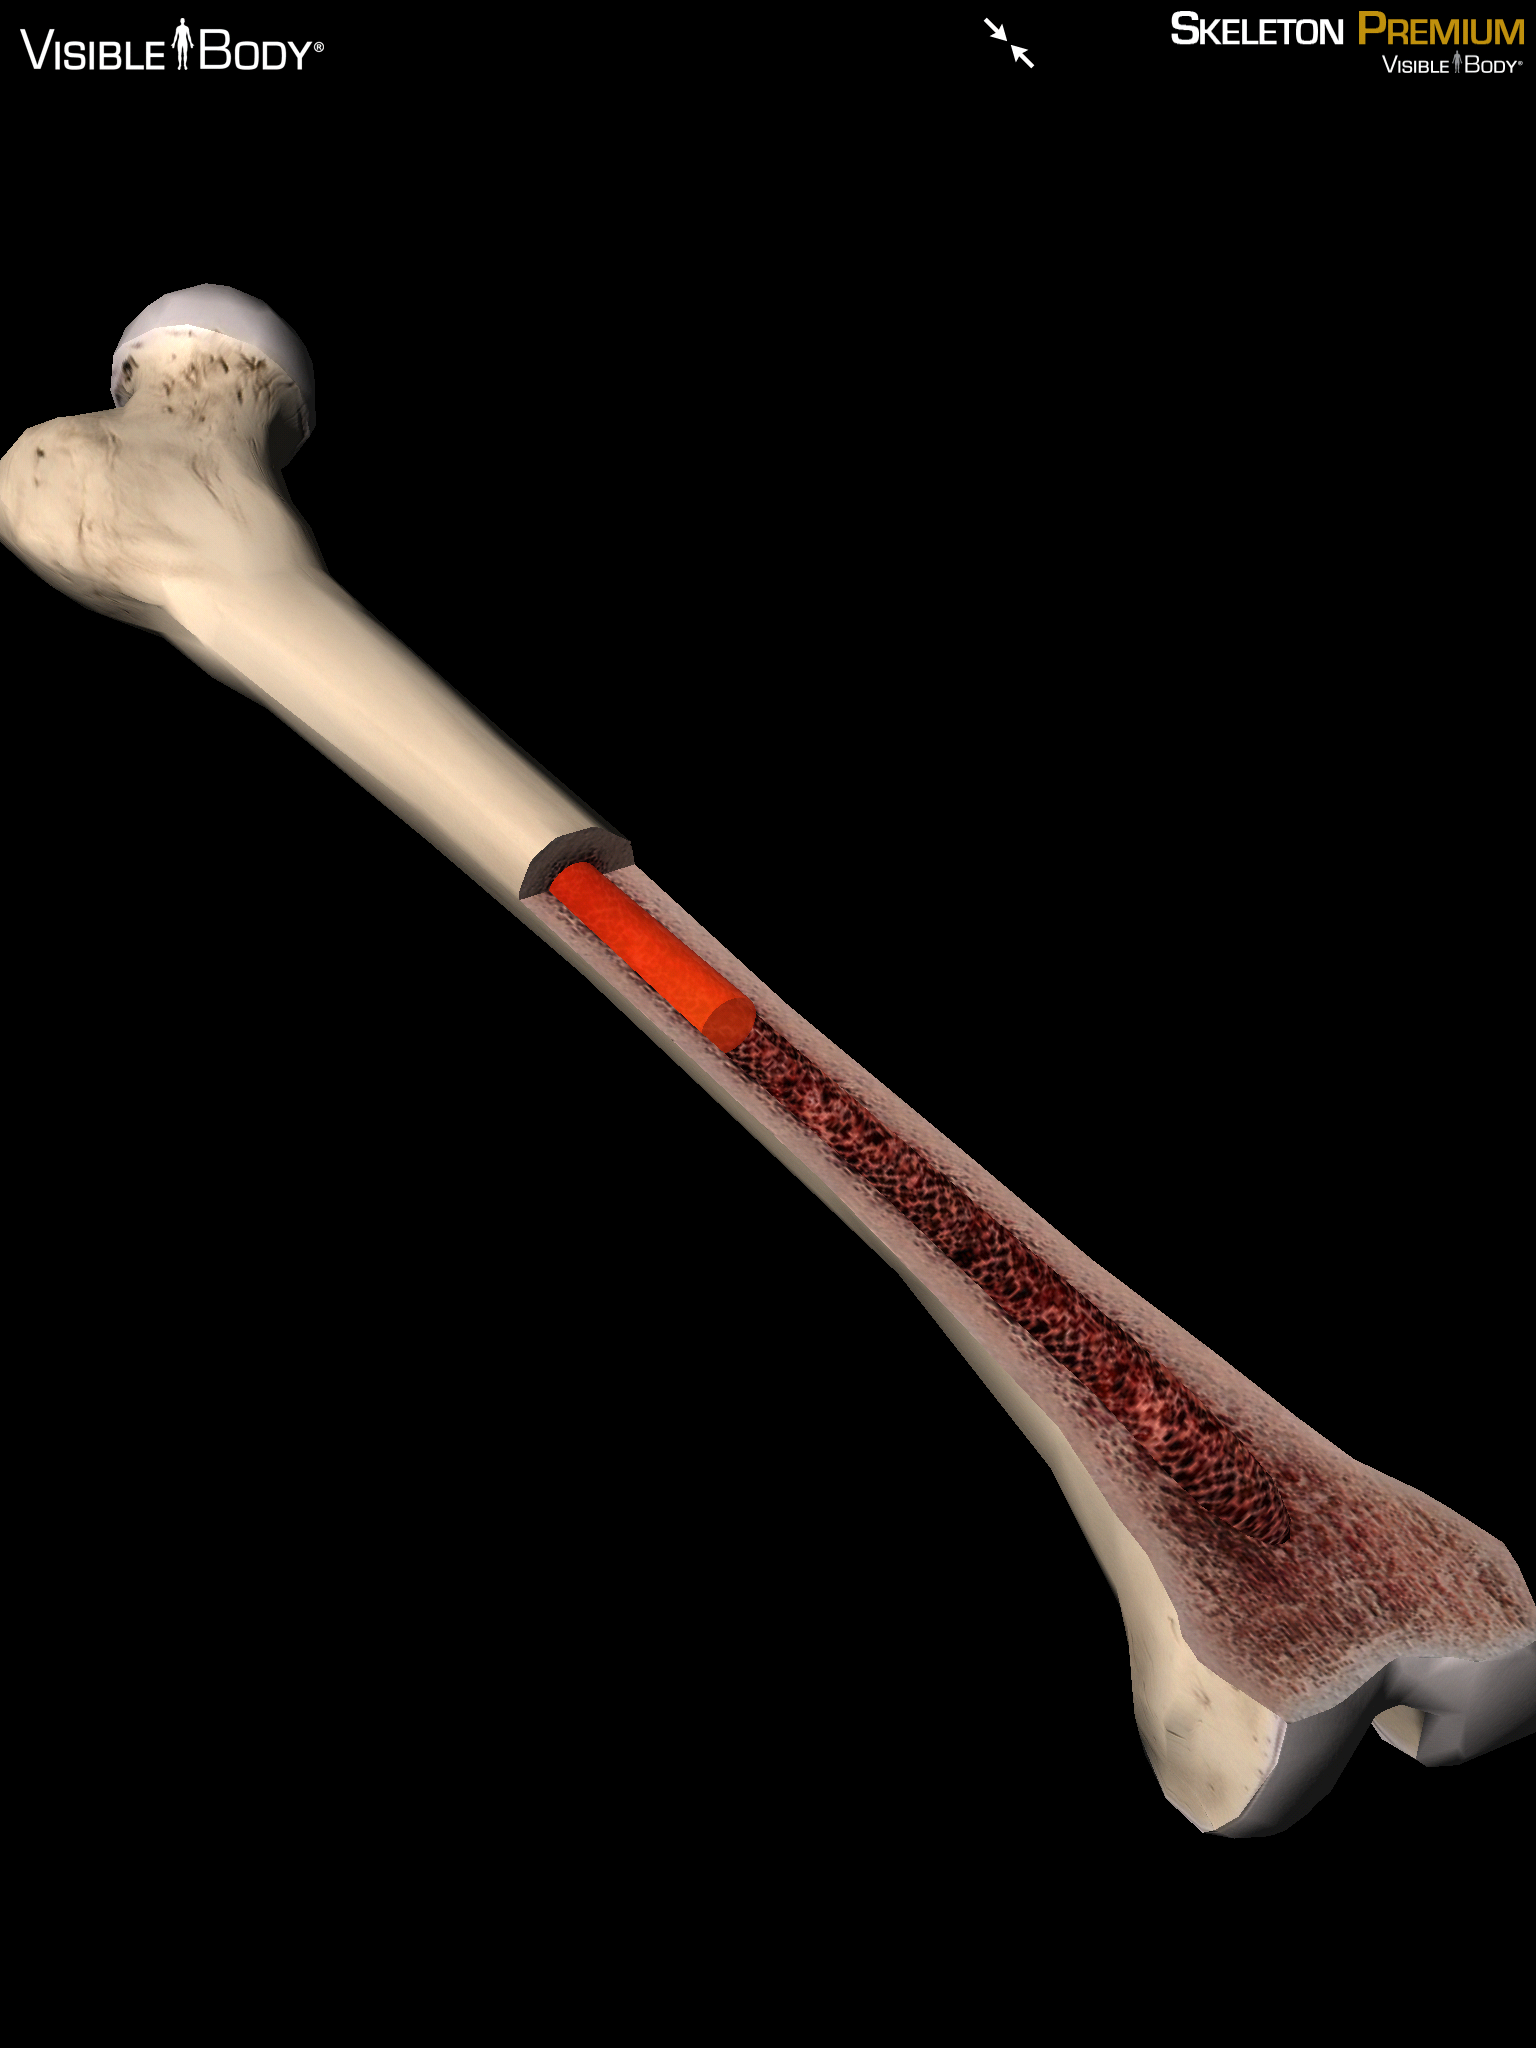 3D Skeletal System: 5 Cool Facts about the Femur